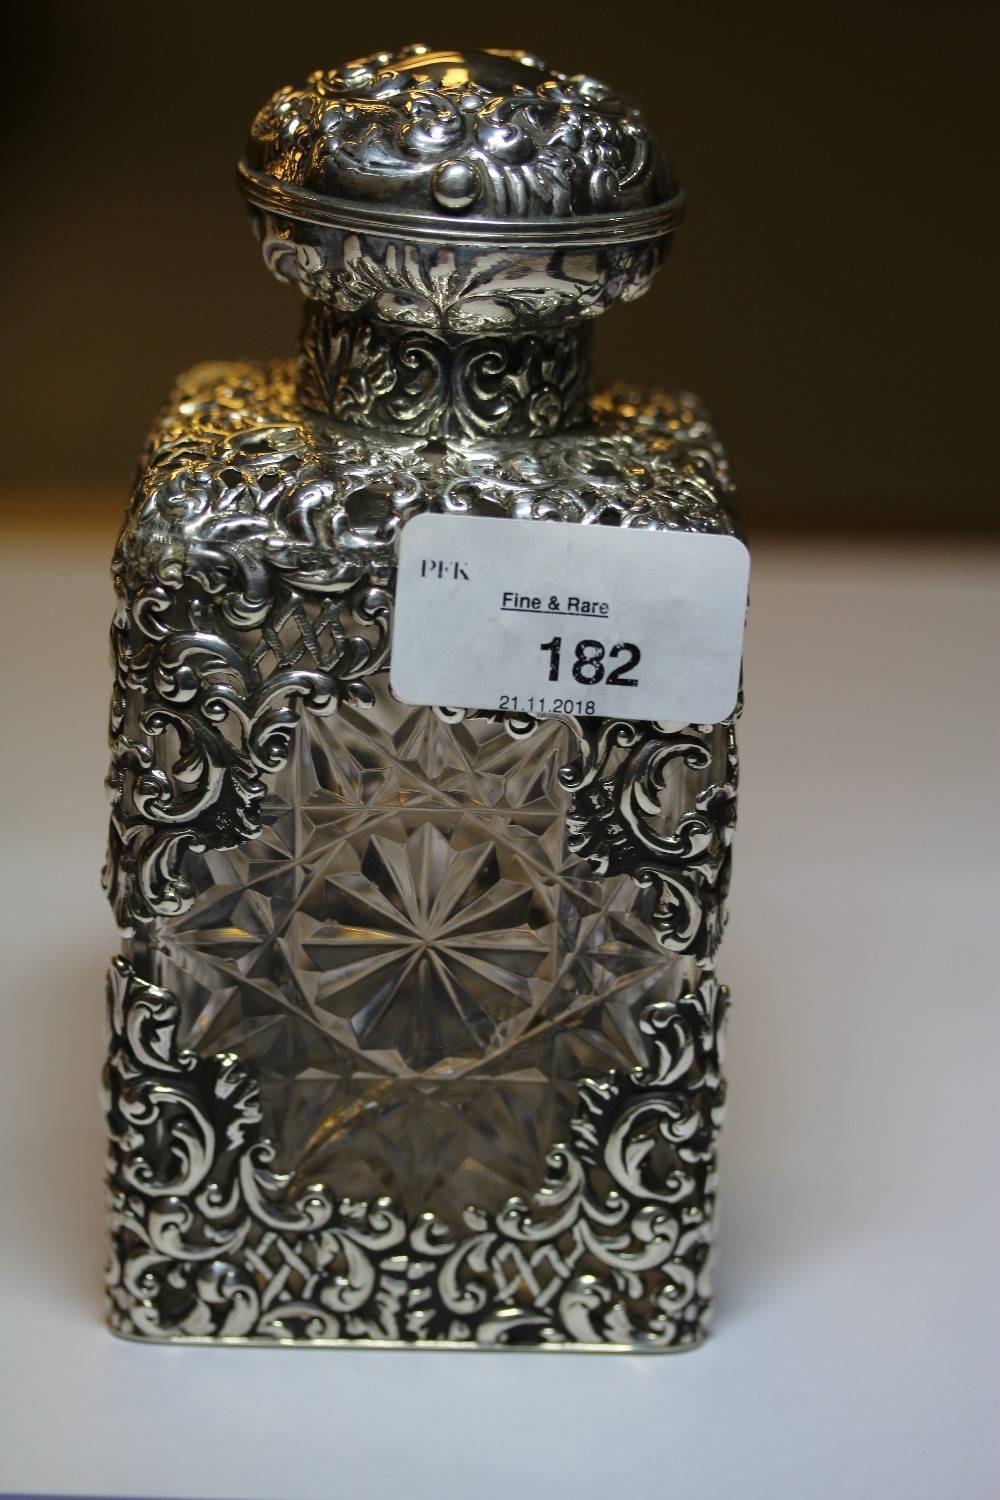 Edward VII embossed silver covered star cut glass scent bottle, the mount by Goldsmiths &